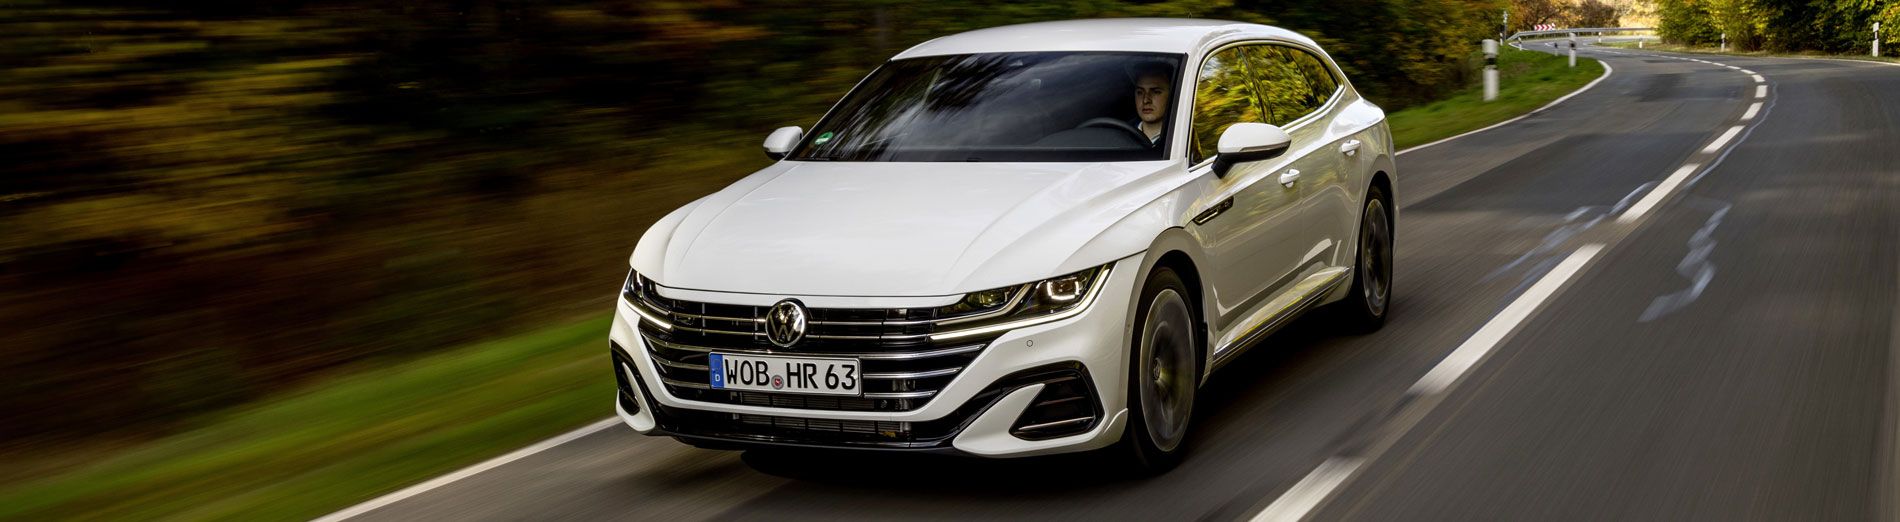 Plug-in hybrid Arteon now open for order